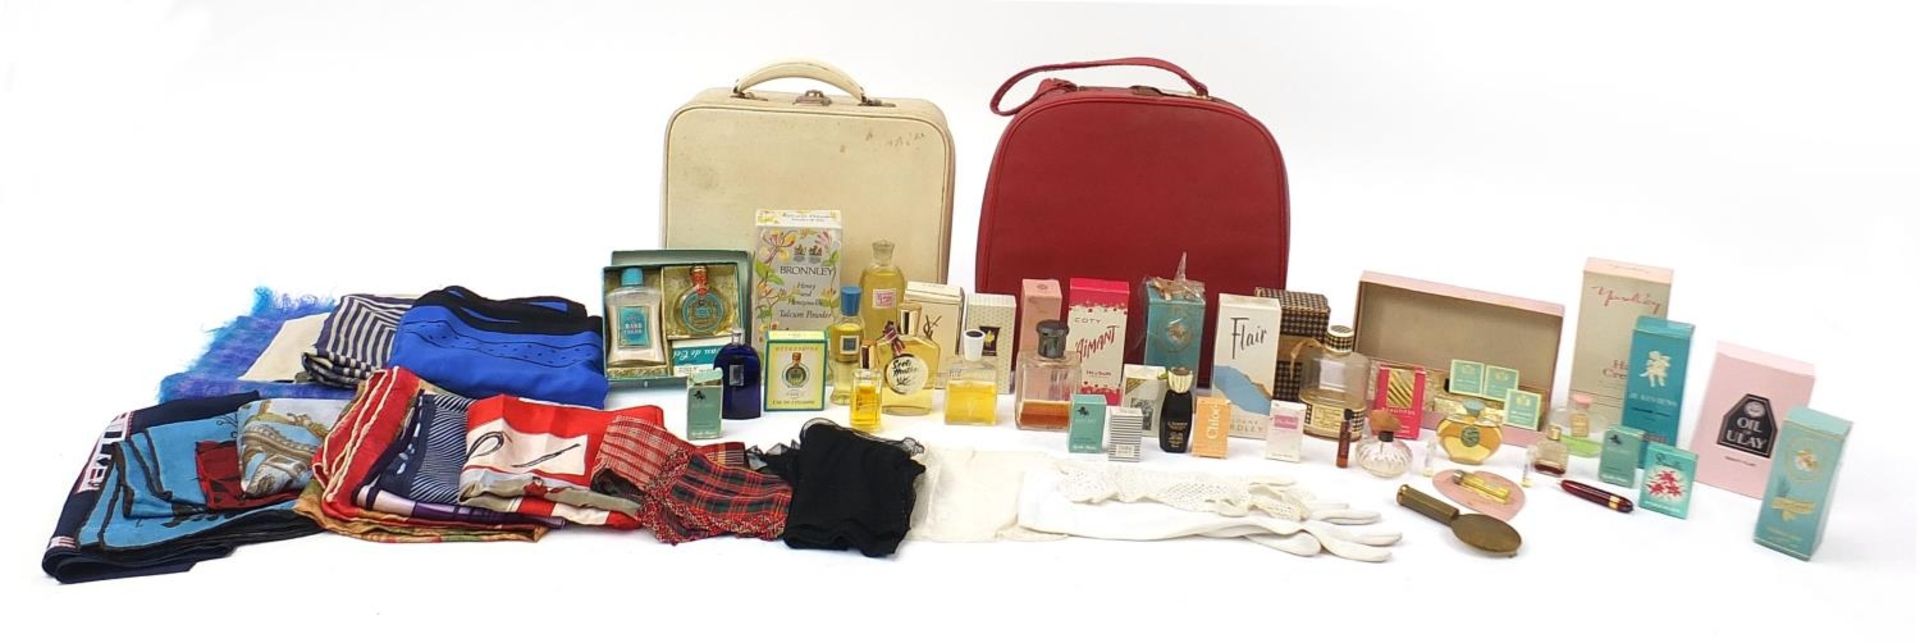 Collection of vintage and later Hermes style scarves and perfumes including Christian Dior, Yves